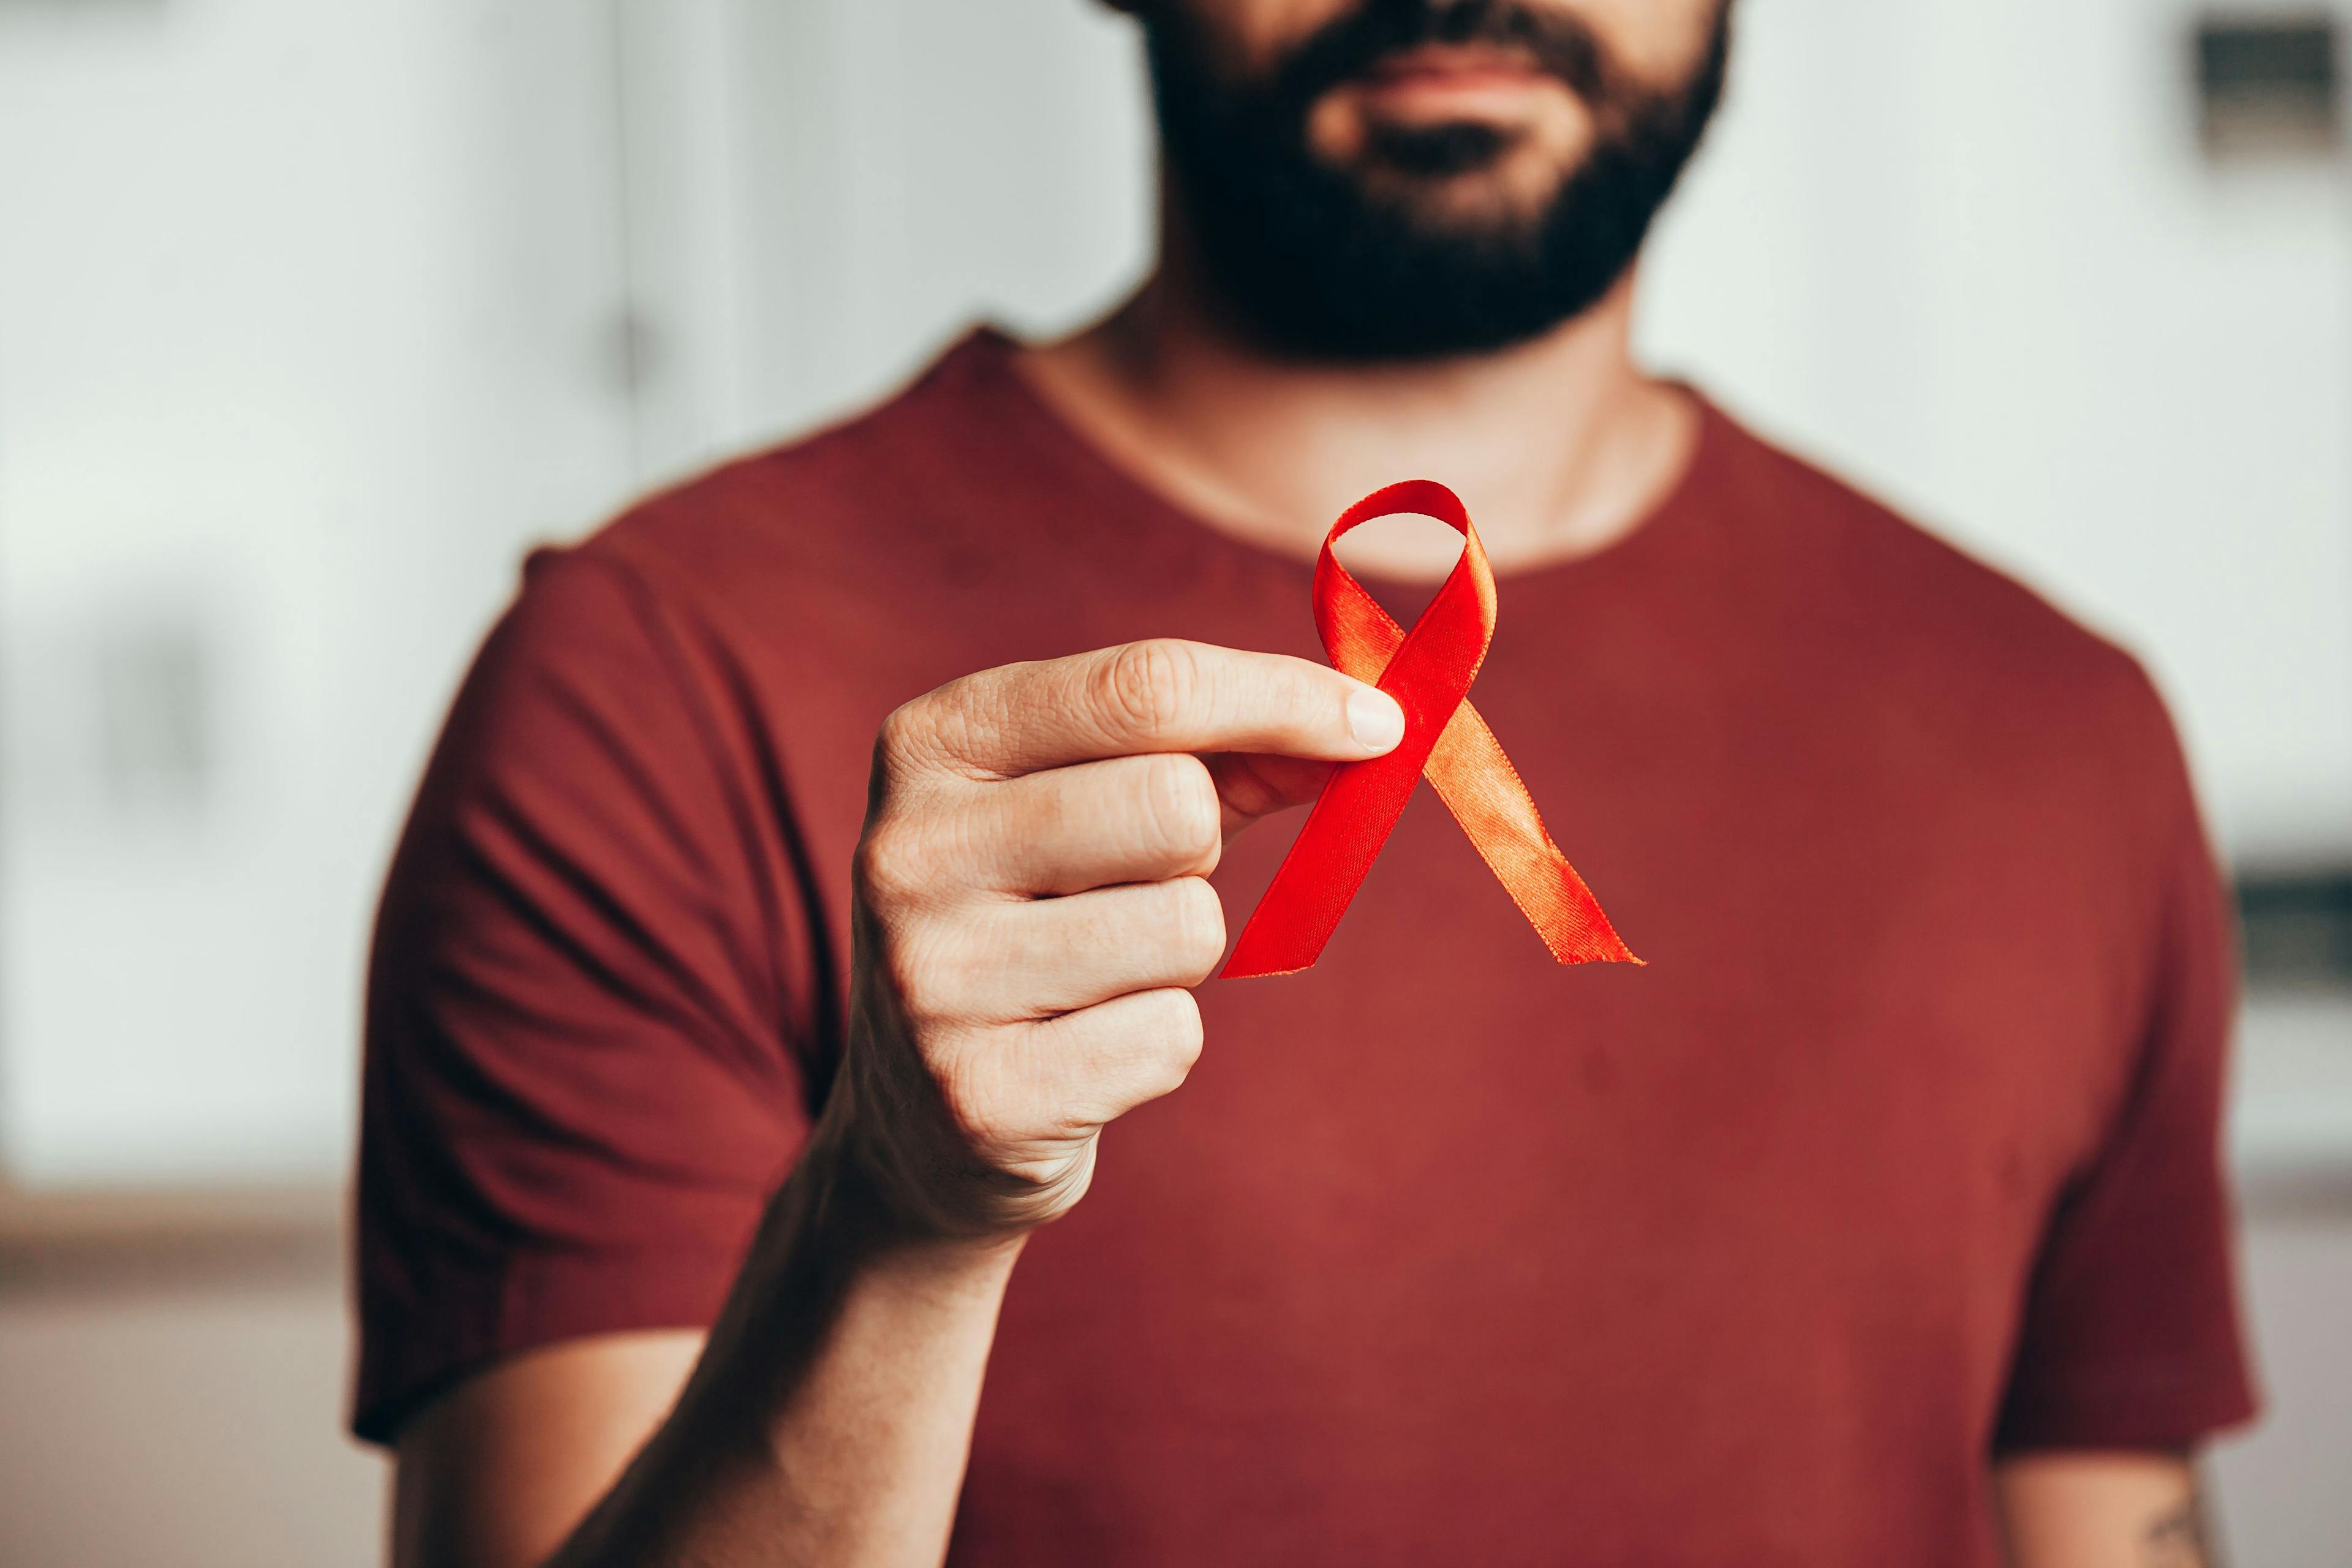 Hispanic/Latino people face disproportionately high HIV incidence, but one CROI 2022 study found those not born in the US are more likely to have stage 3 HIV (AIDS) diagnoses.